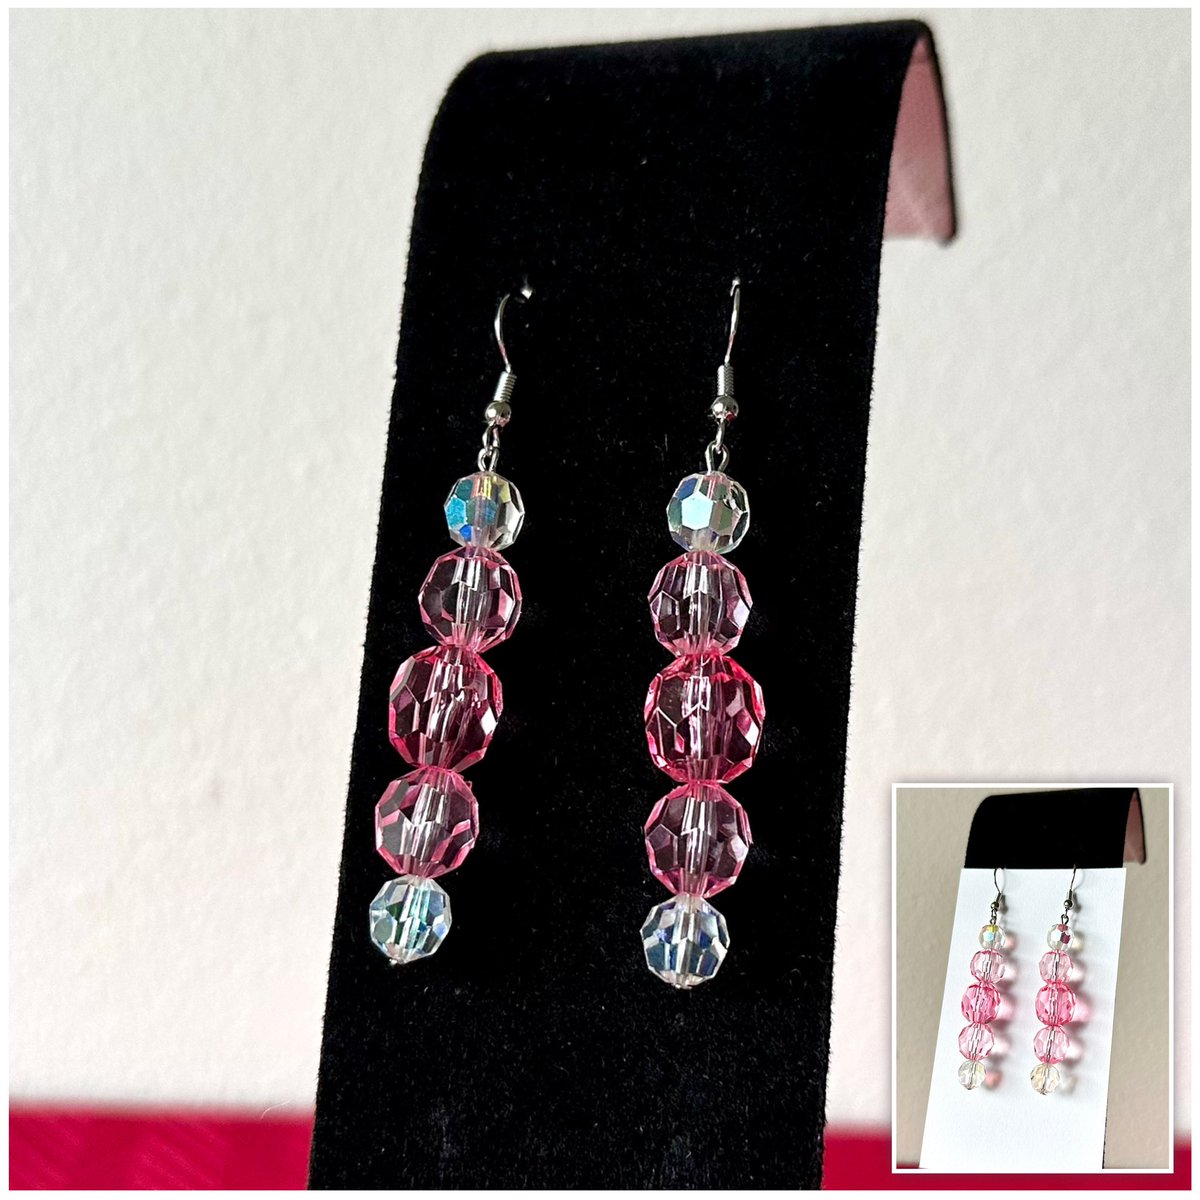 Pink Ombré Earrings
(Lighting can affect how these earrings look)

justaskcassie.square.site/product/pink-o…

#pink #pinkearrings #ombreearrings #ombrejewelry #prettyinpink #pinkjewelry #handmade #pinkombre #uniquejewelry #uniqueearrings #earringsoftheday #earrings #jewelry #uniquegifts #unique